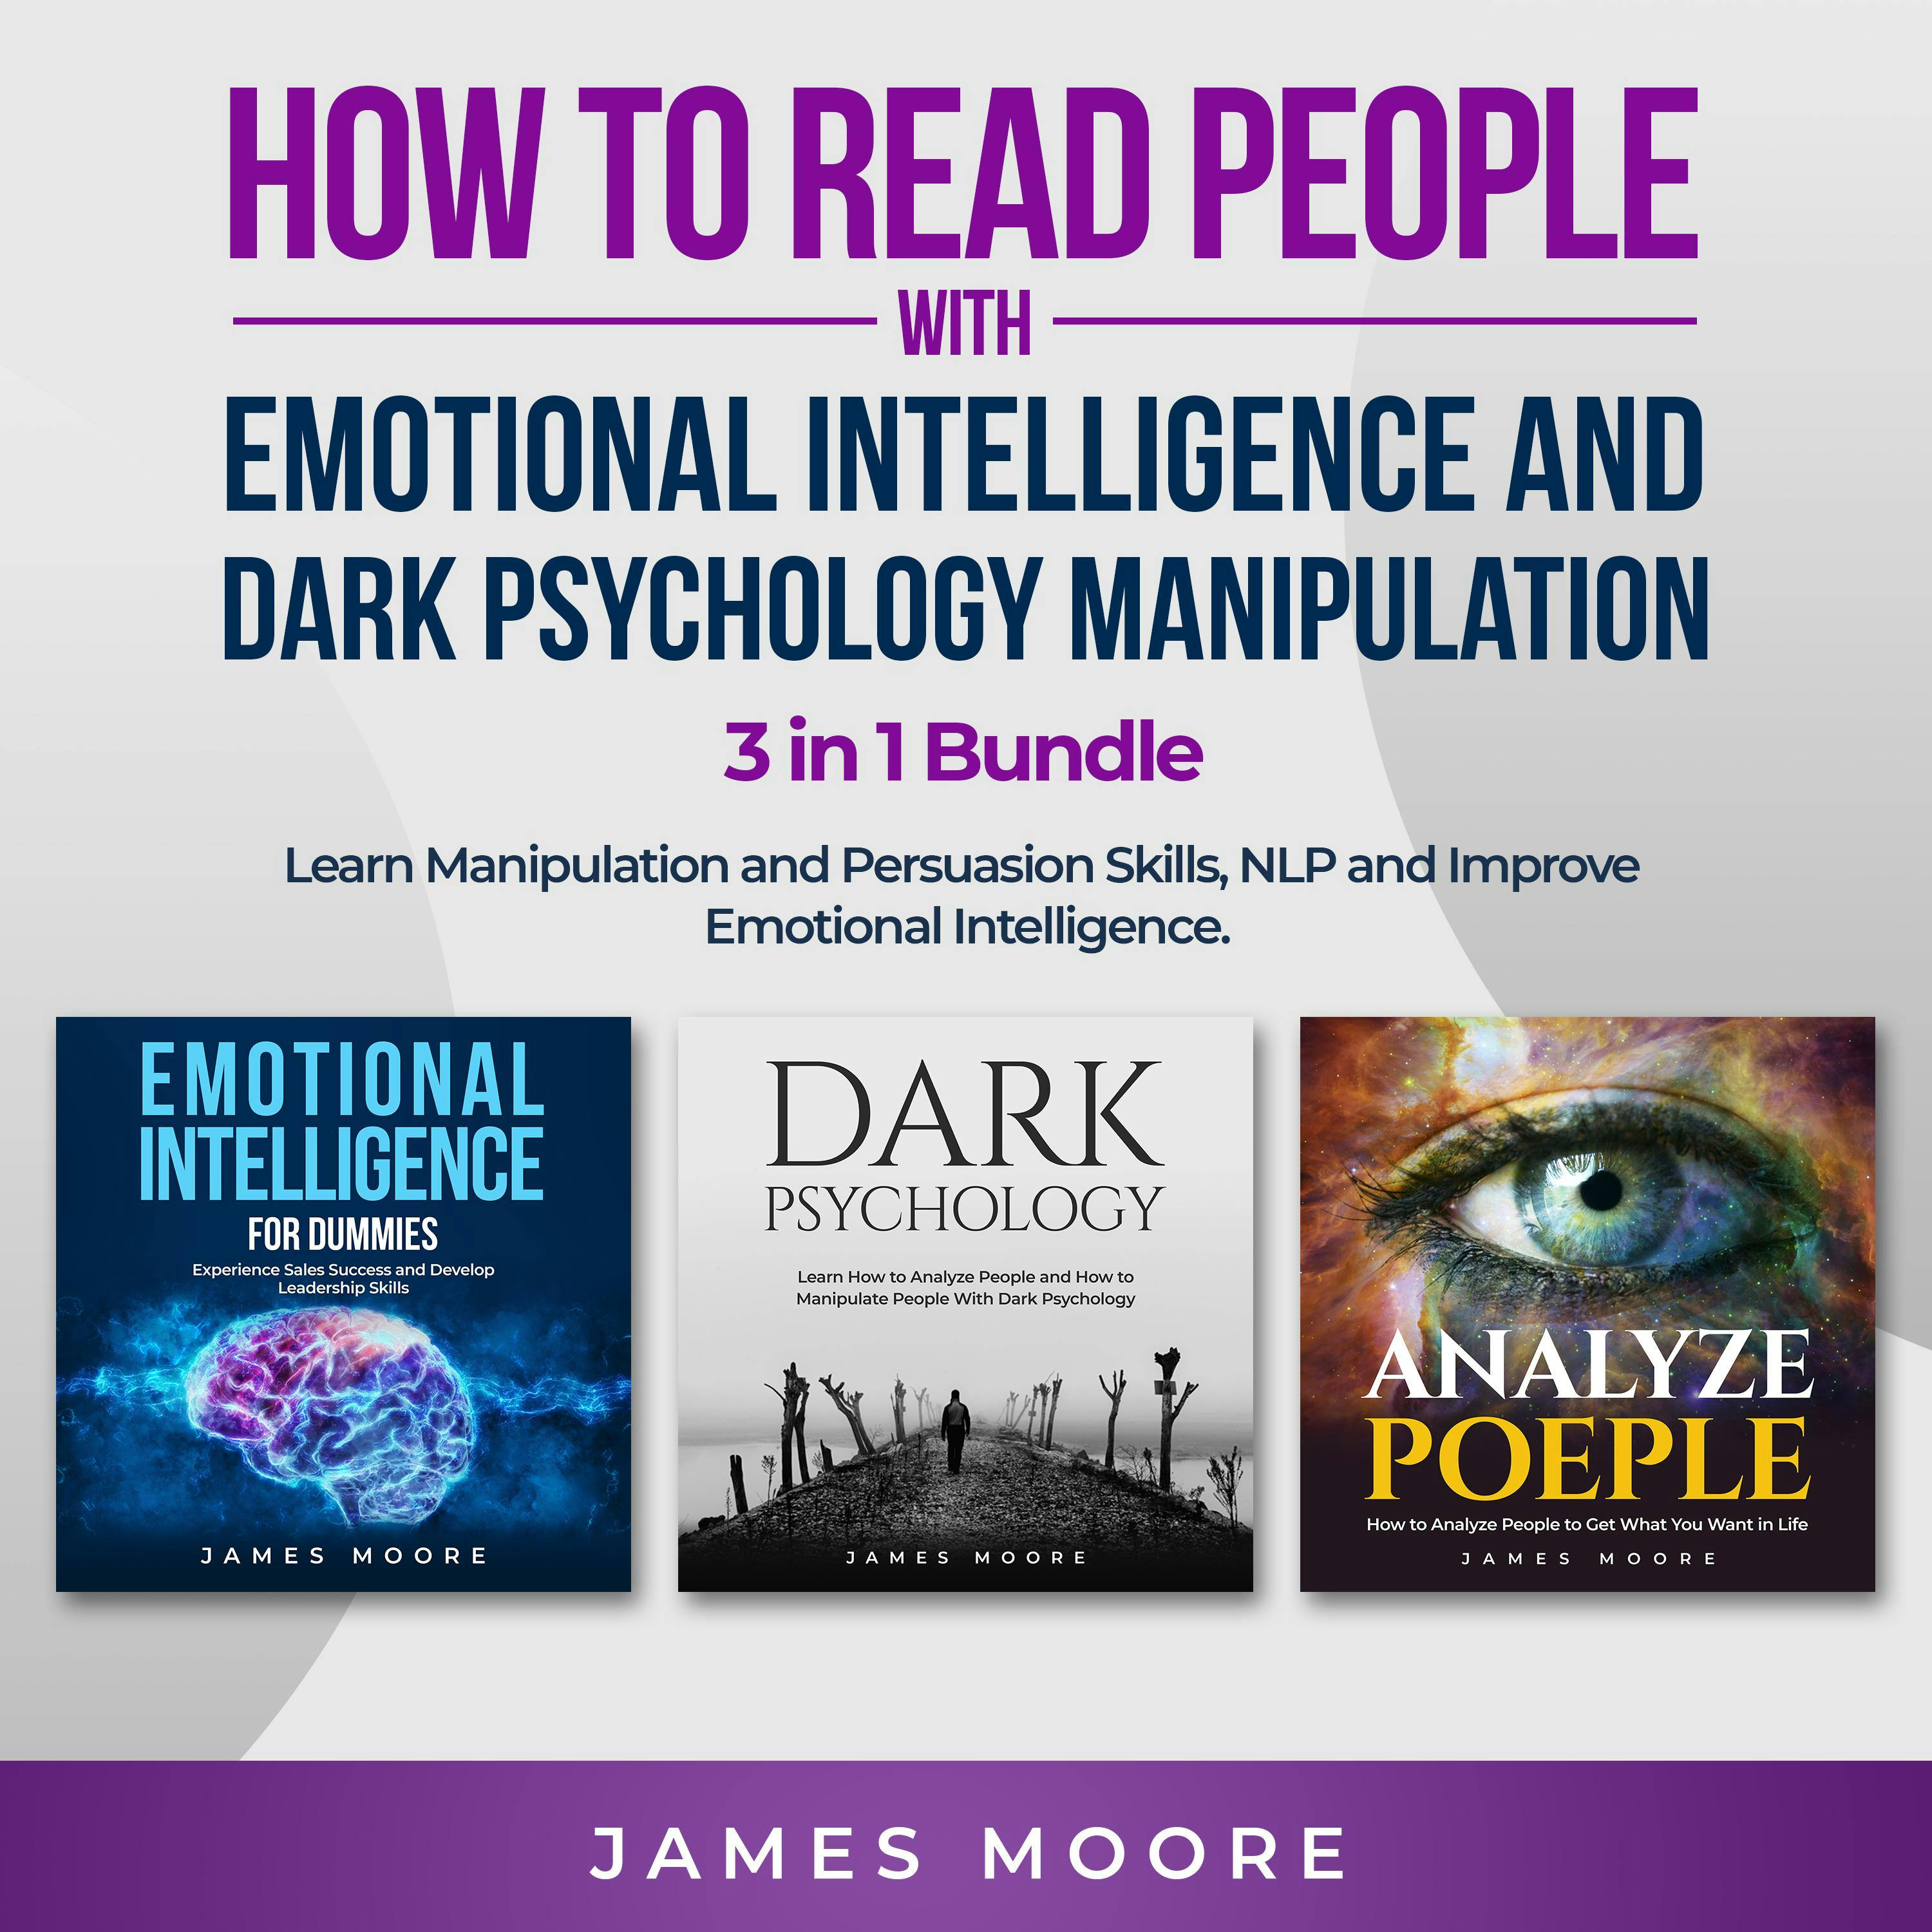 How to Read People with Emotional Intelligence and Dark Psychology Manipulation 3 in 1 Bundle: Learn Manipulation and Persuasion Skills, NLP and Improve Emotional Intelligence - James Moore